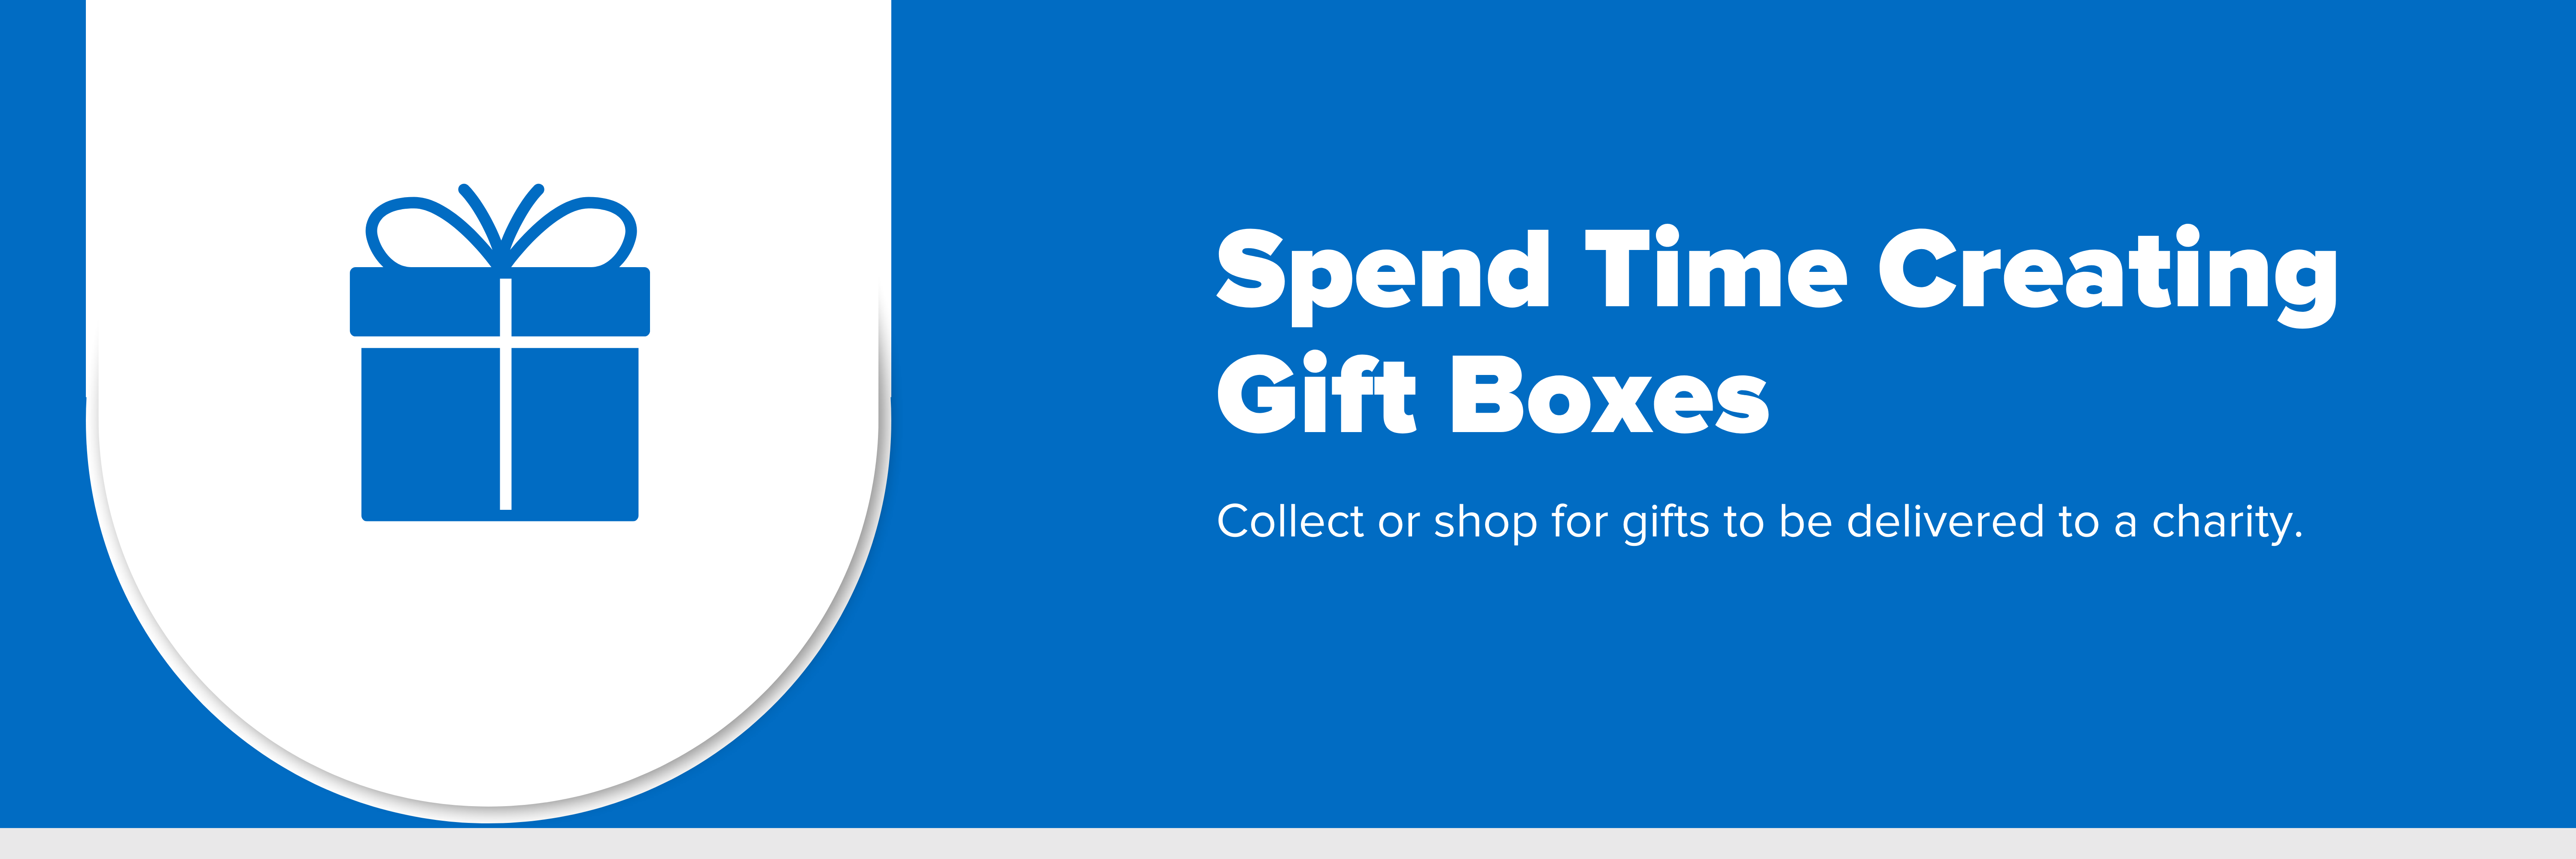 Header image with text 'spend time creating gift boxes'.